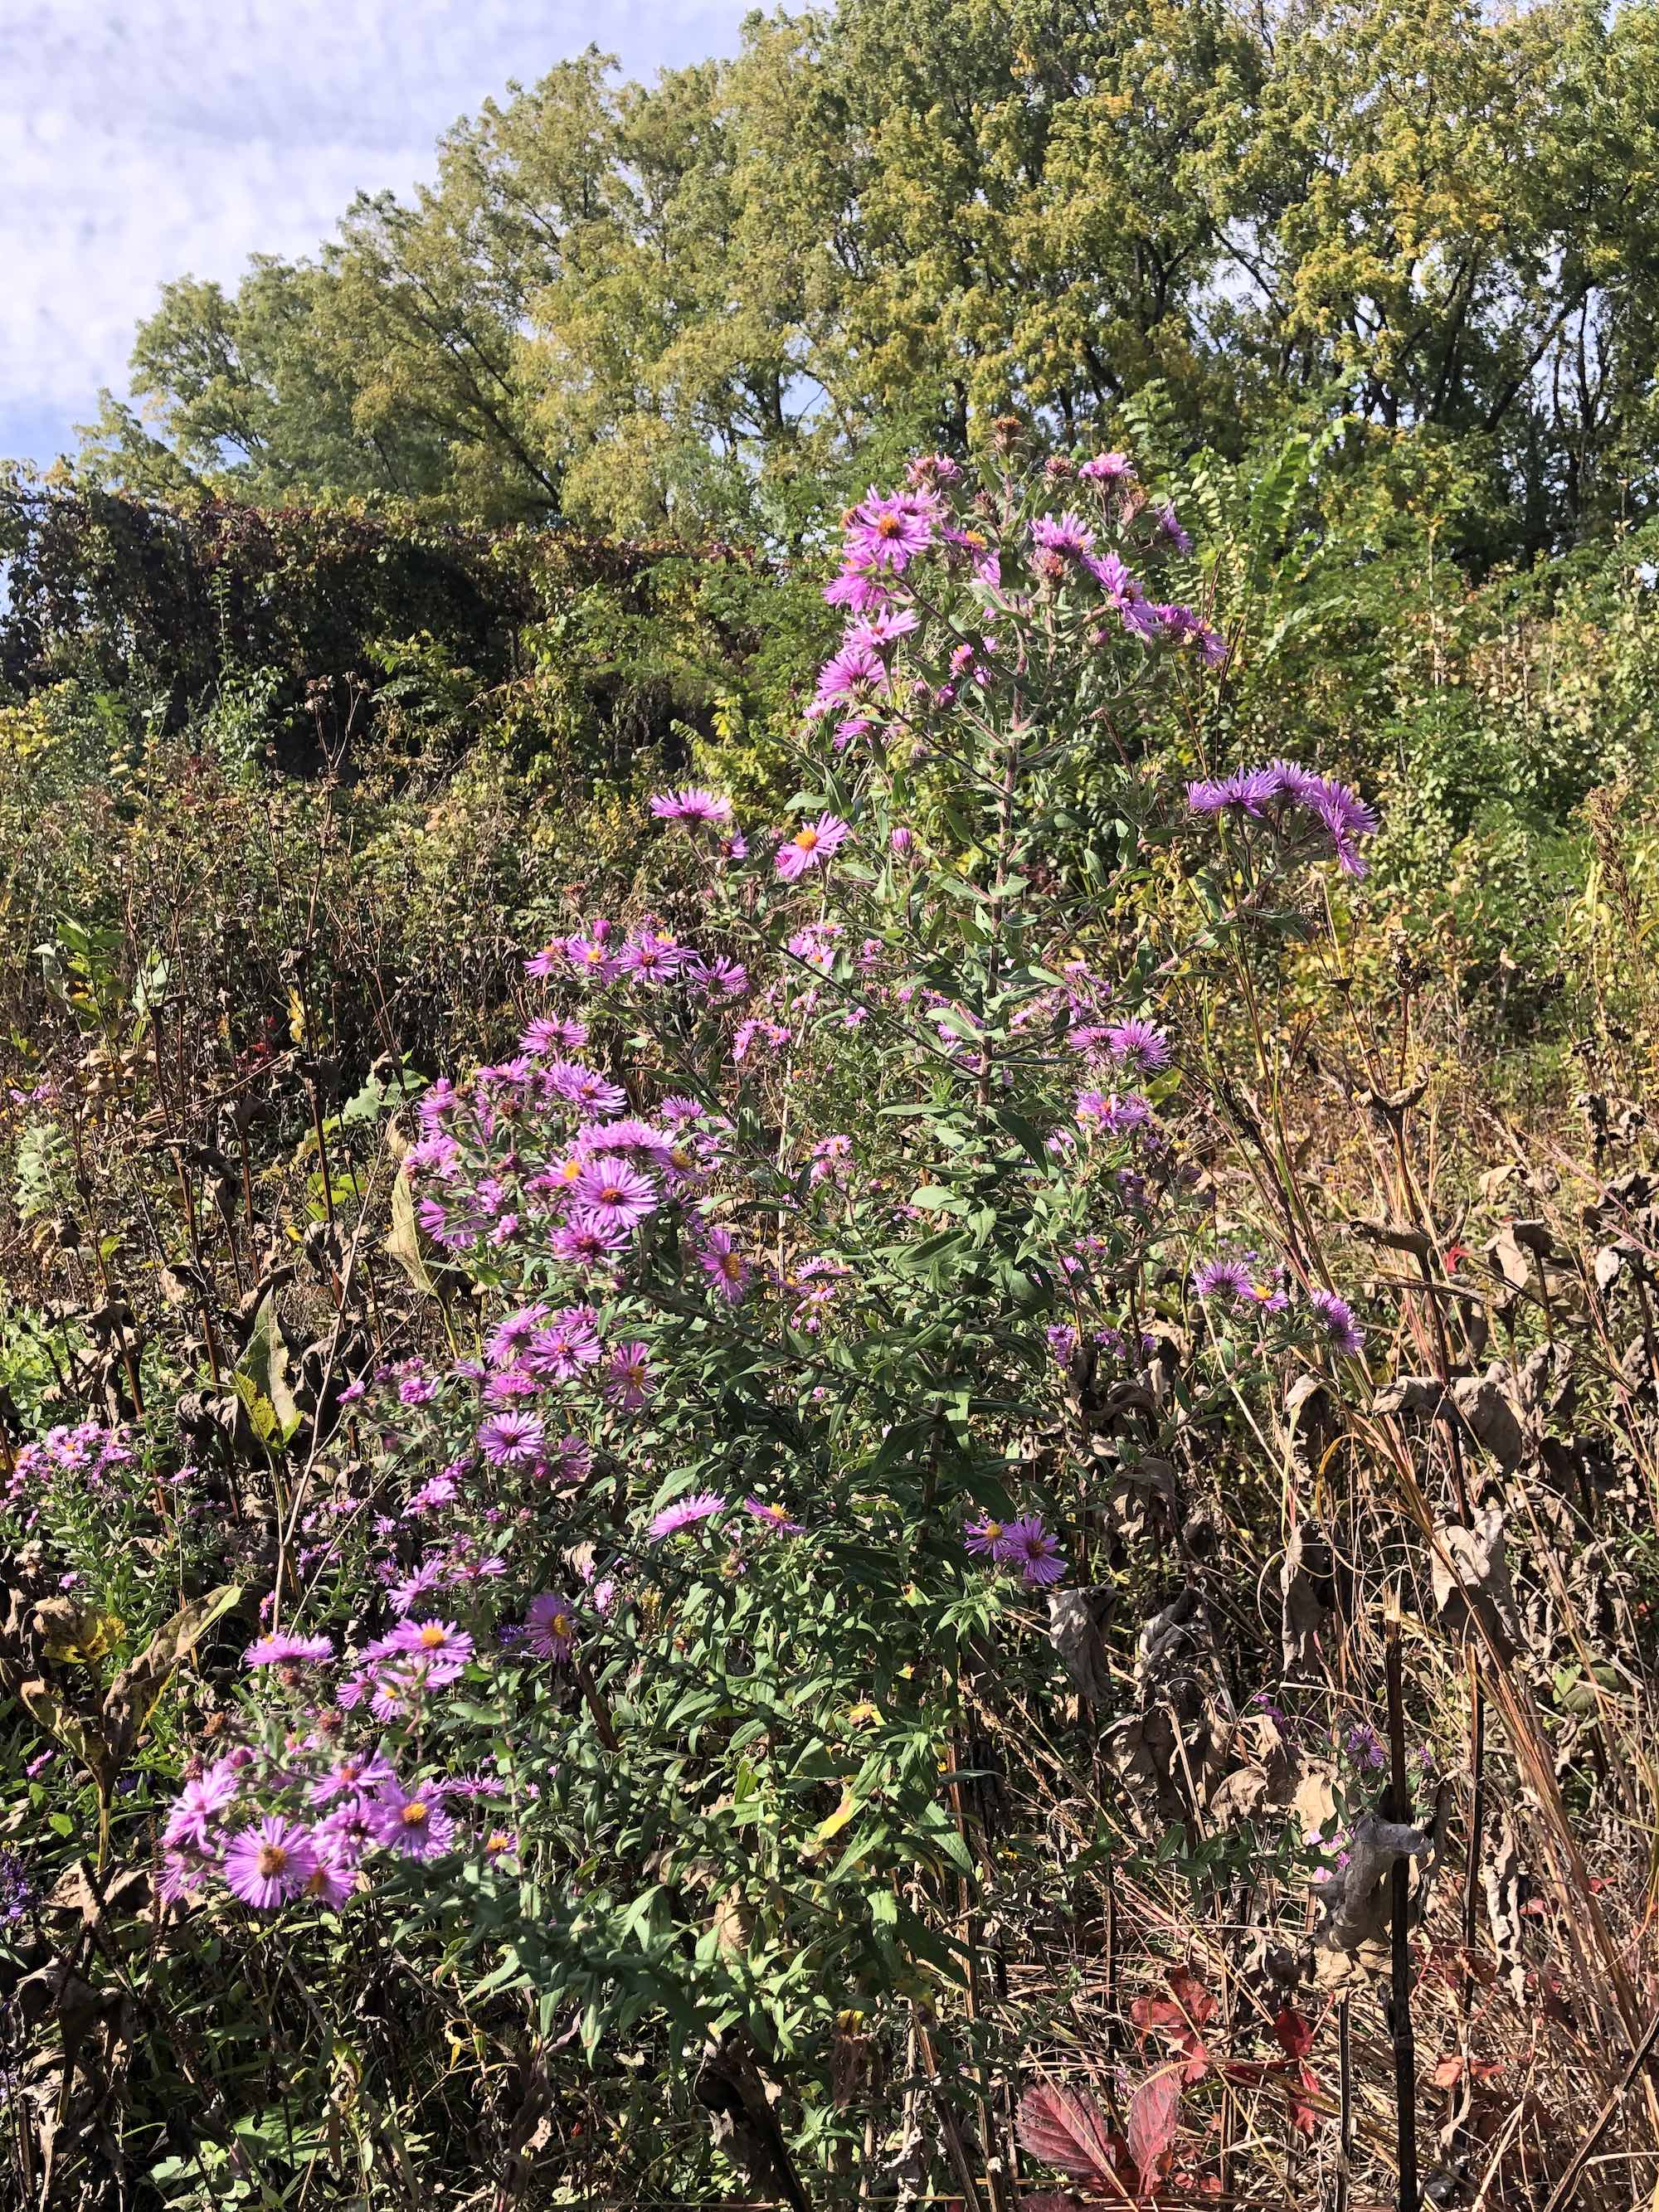 New England Aster along bike path between Midvales Blvd and Beltline in Madison, Wisconsin on October 4, 2022.